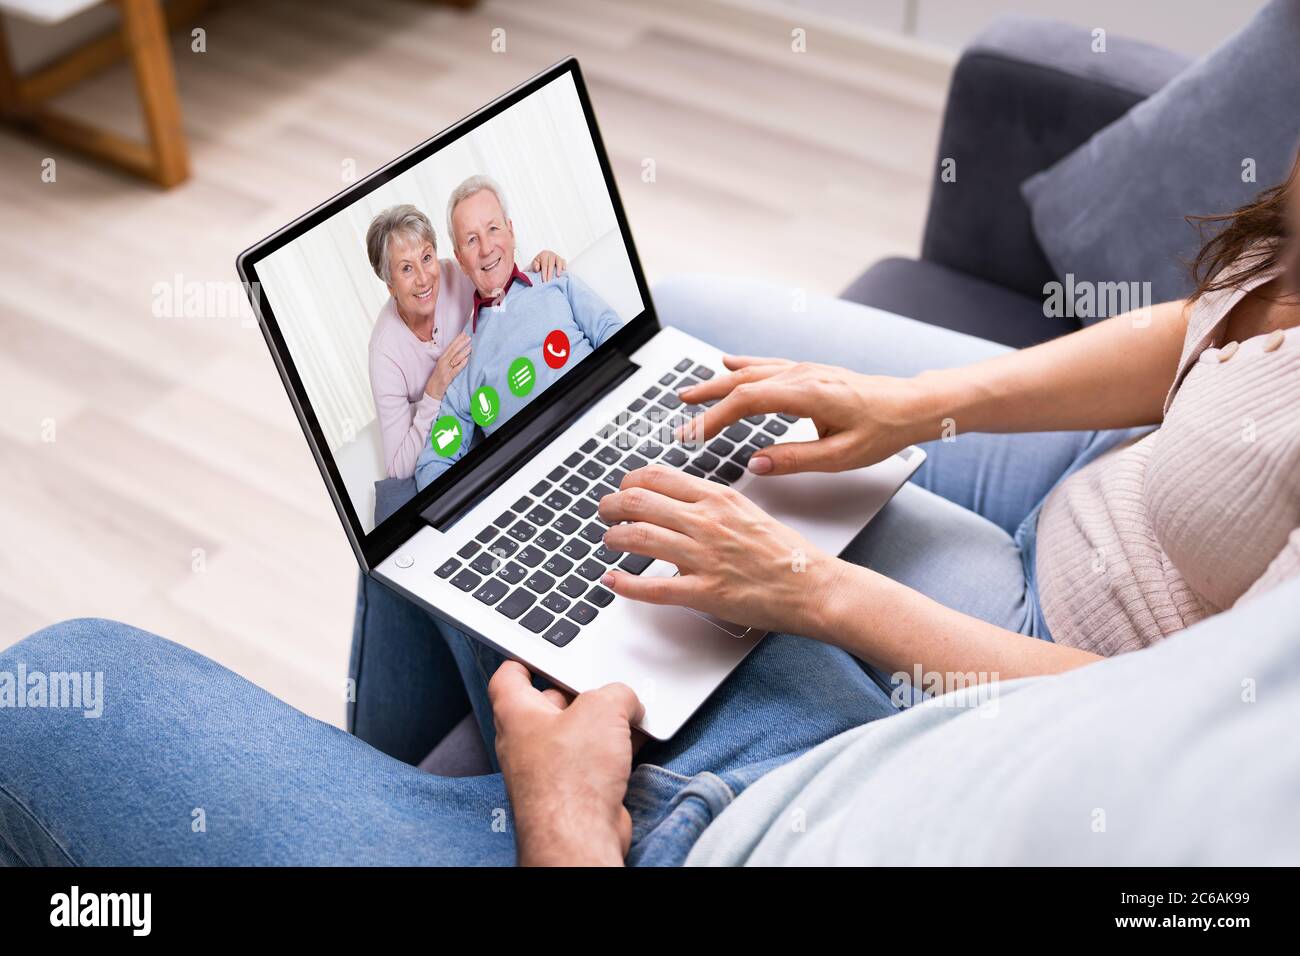 Couple In Video Conference Chat With Parents Stock Photo